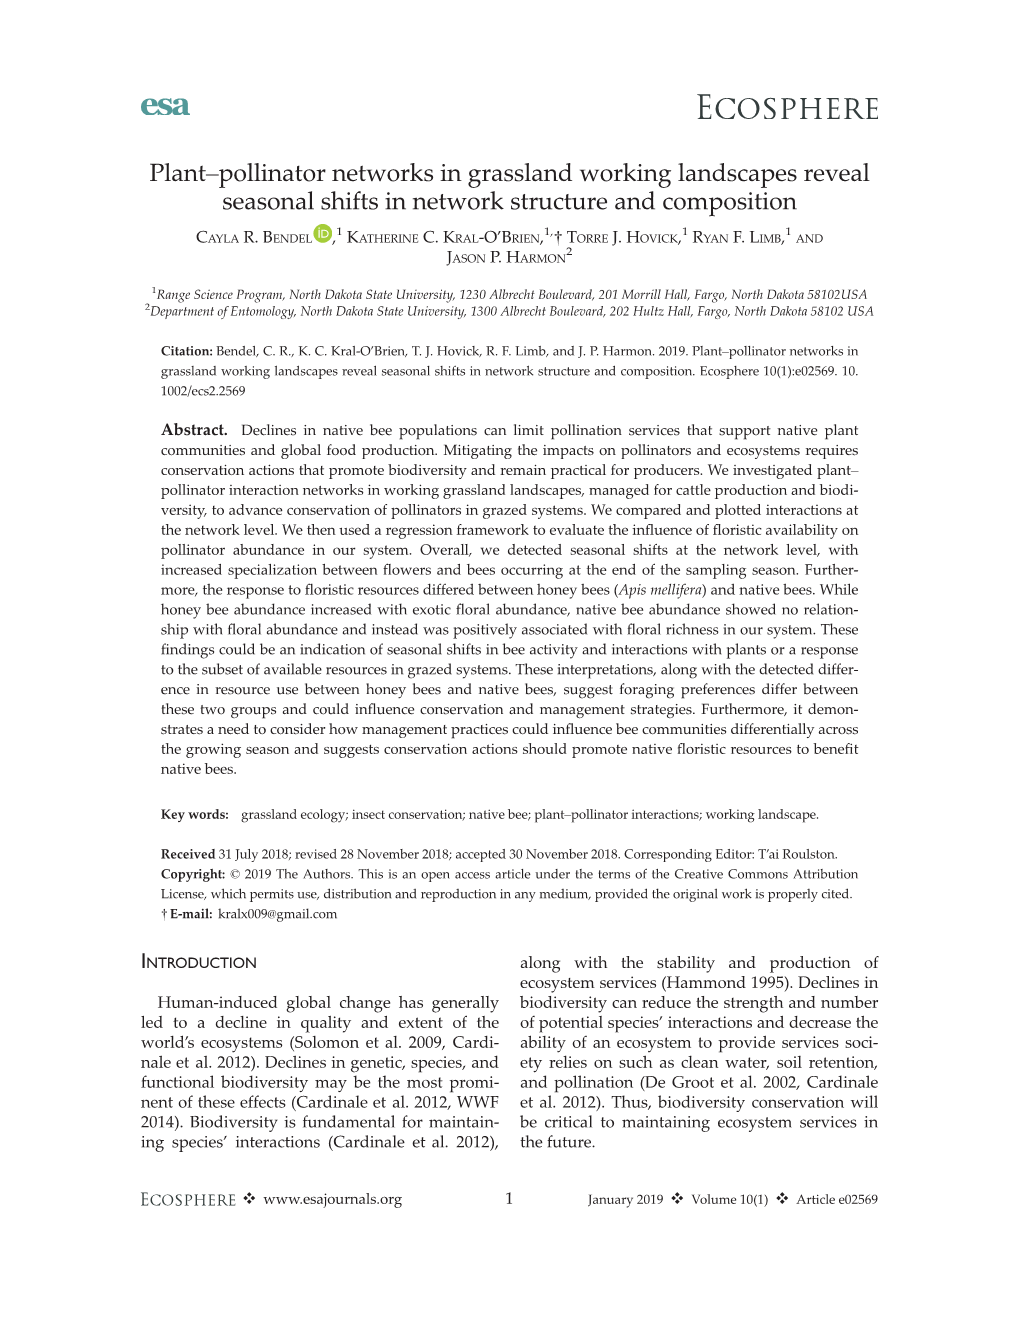 Plant–Pollinator Networks in Grassland Working Landscapes Reveal Seasonal Shifts in Network Structure and Composition 1 1, 1 1 CAYLA R